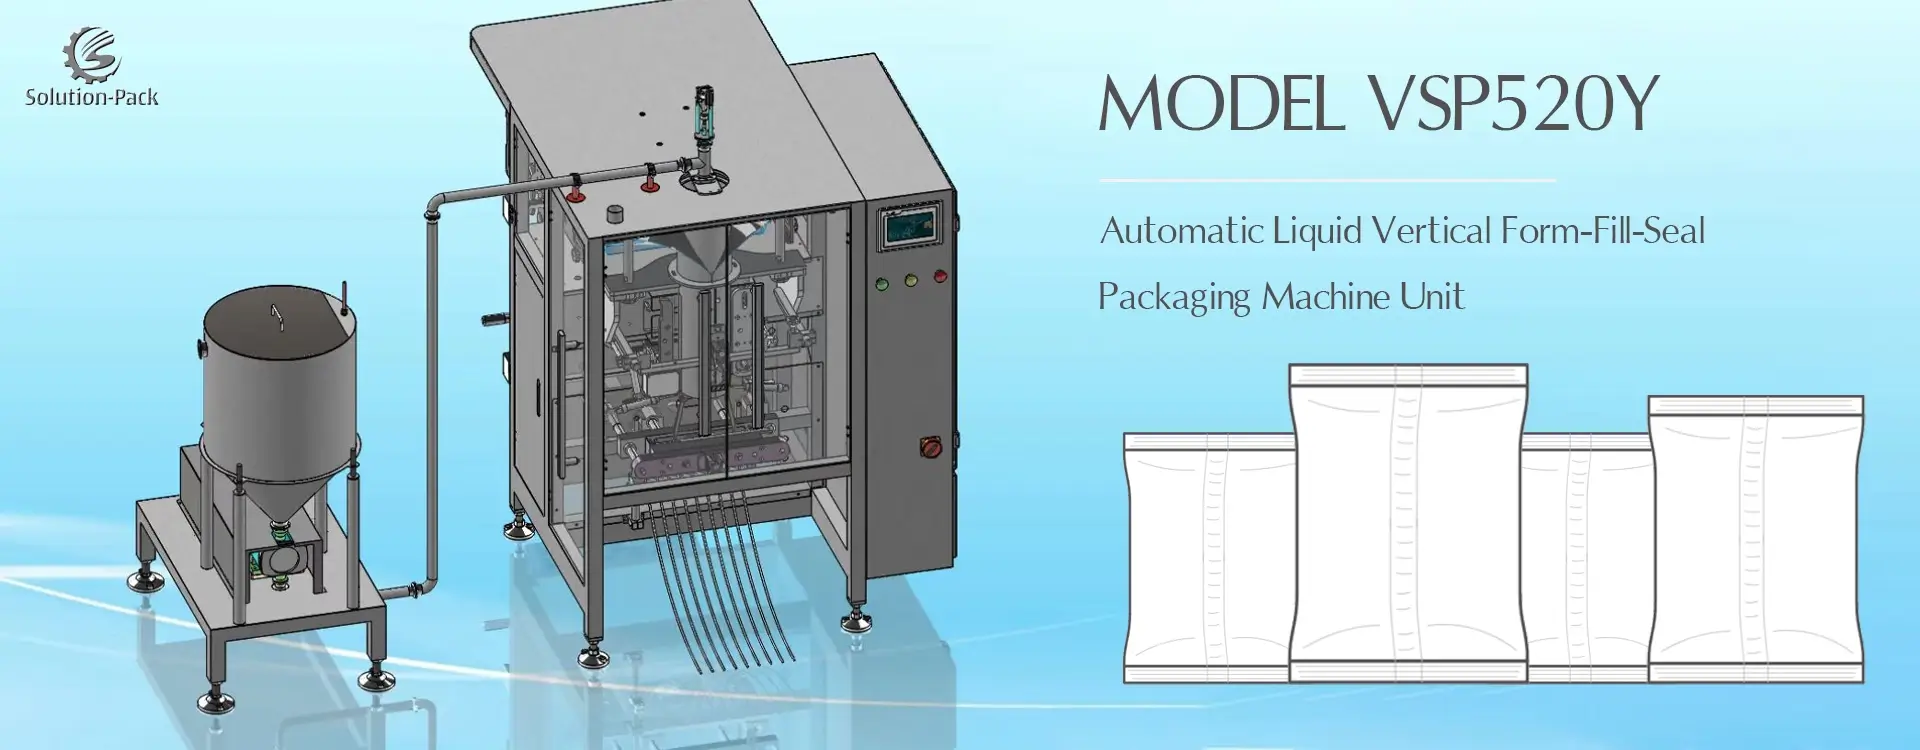 Model VSP520Y Automatic Liquid Vertical Packaging Machine Unit | Solution-Pack (Heading Banner Picture)